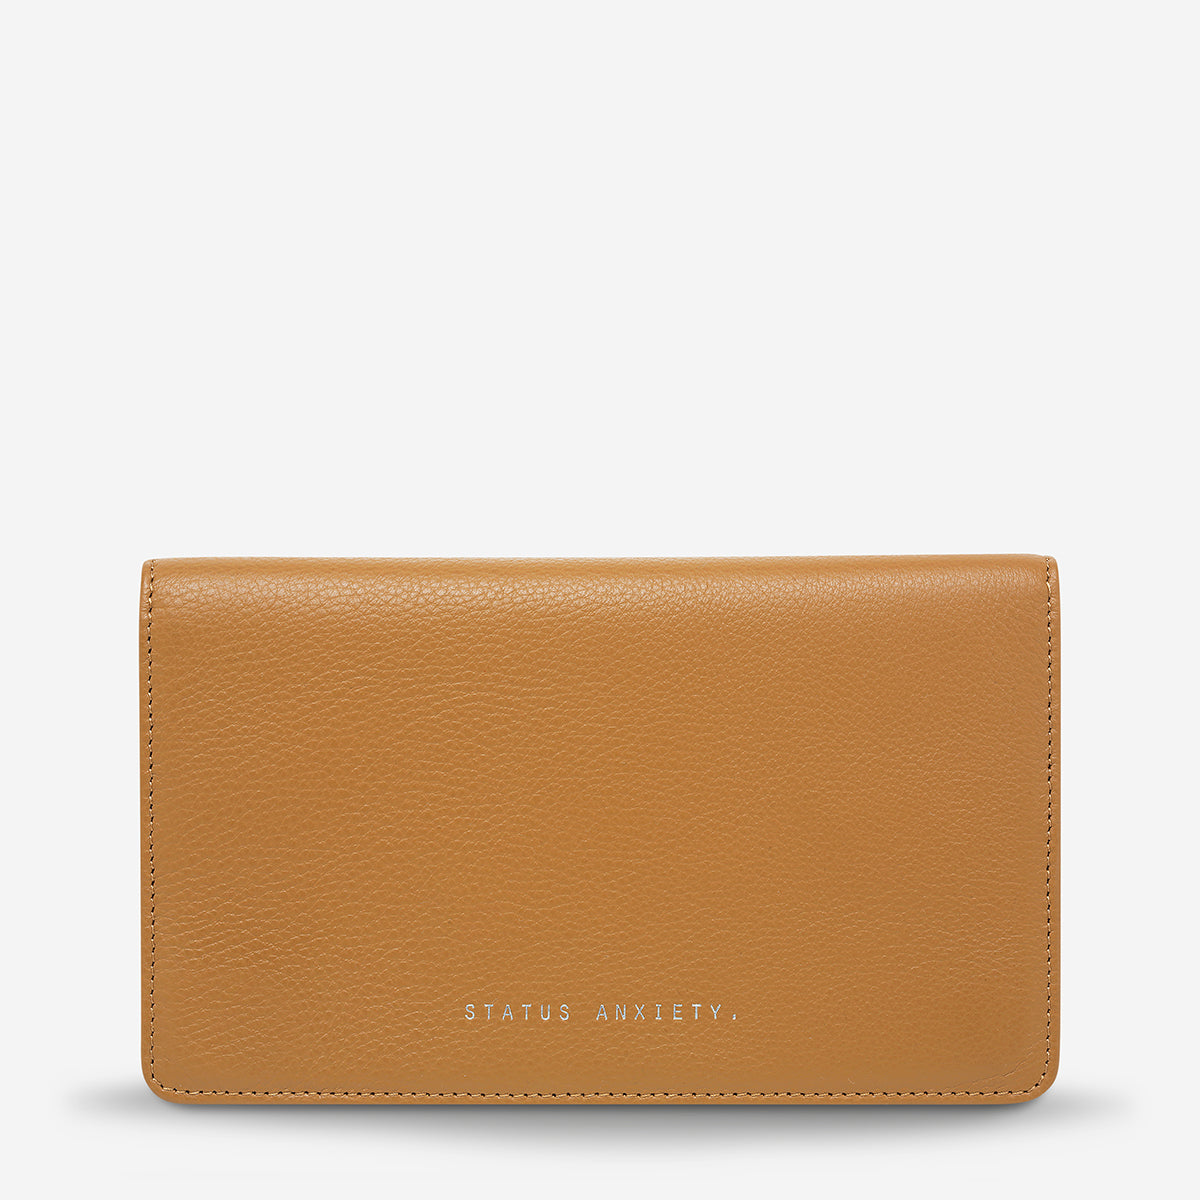 Status Anxiety Living Proof Women's Leather Wallet Tan